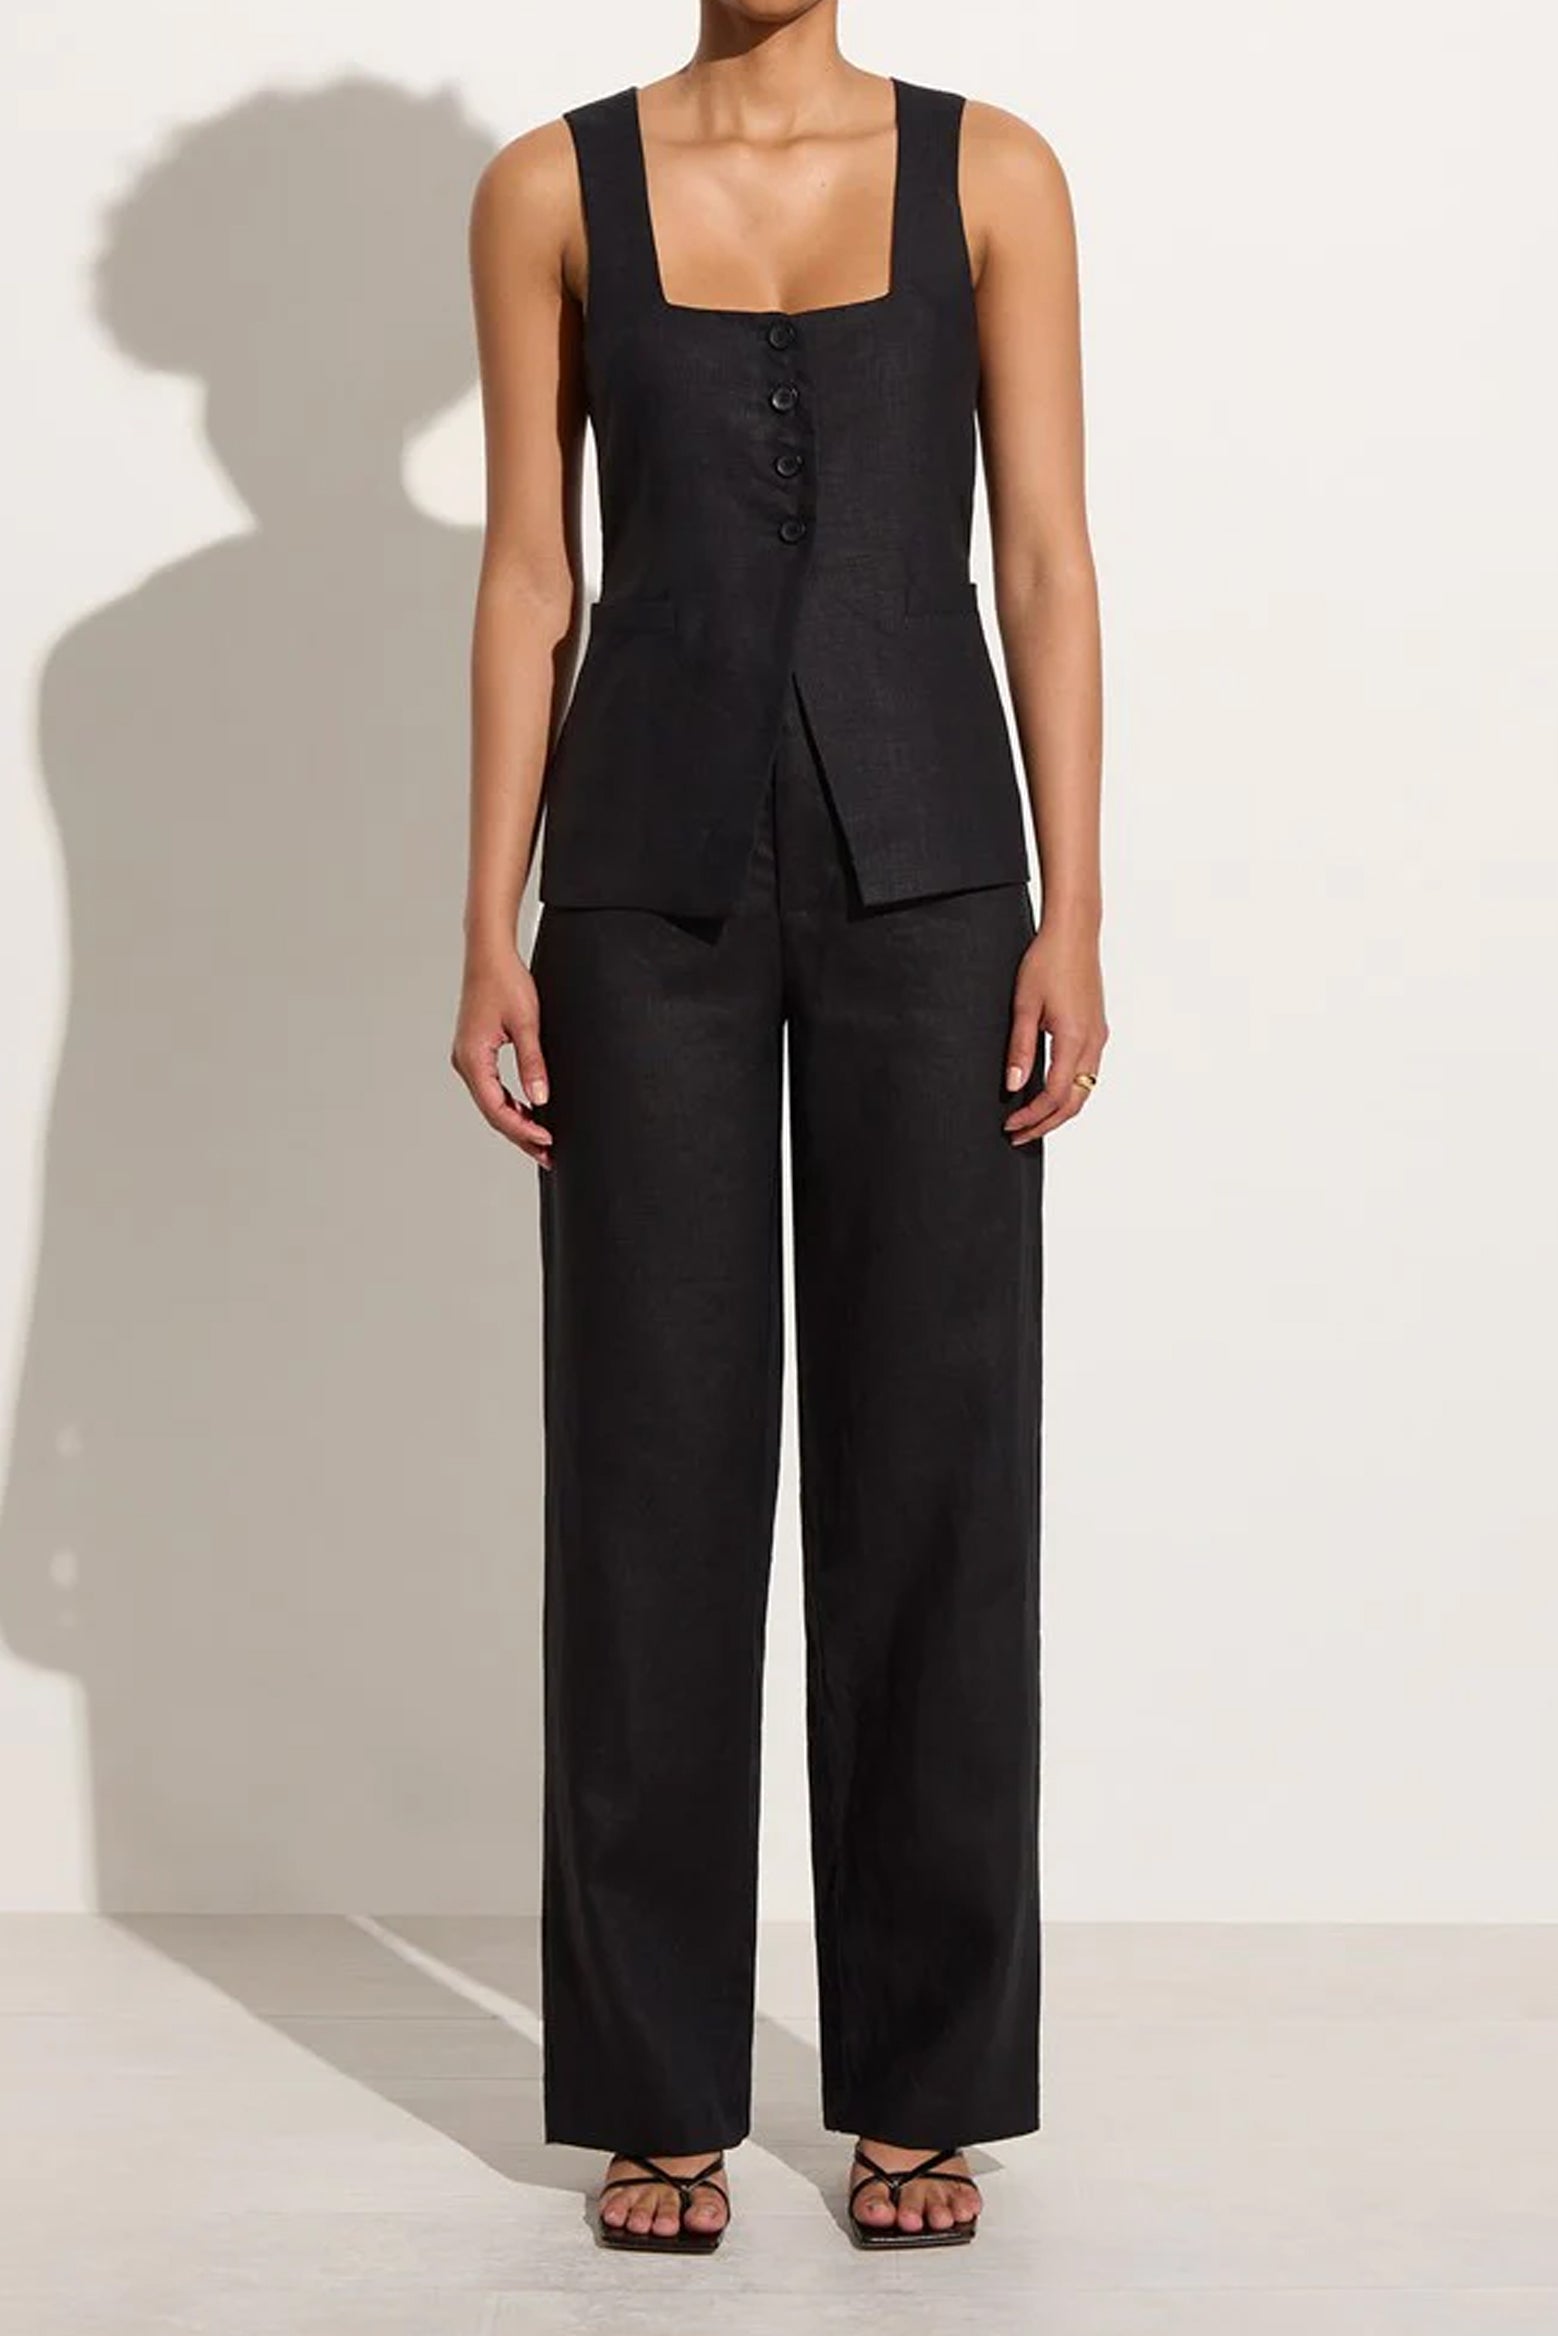 Faithfull The Brand Isotta Pant in Black available at The New Trend Australia.